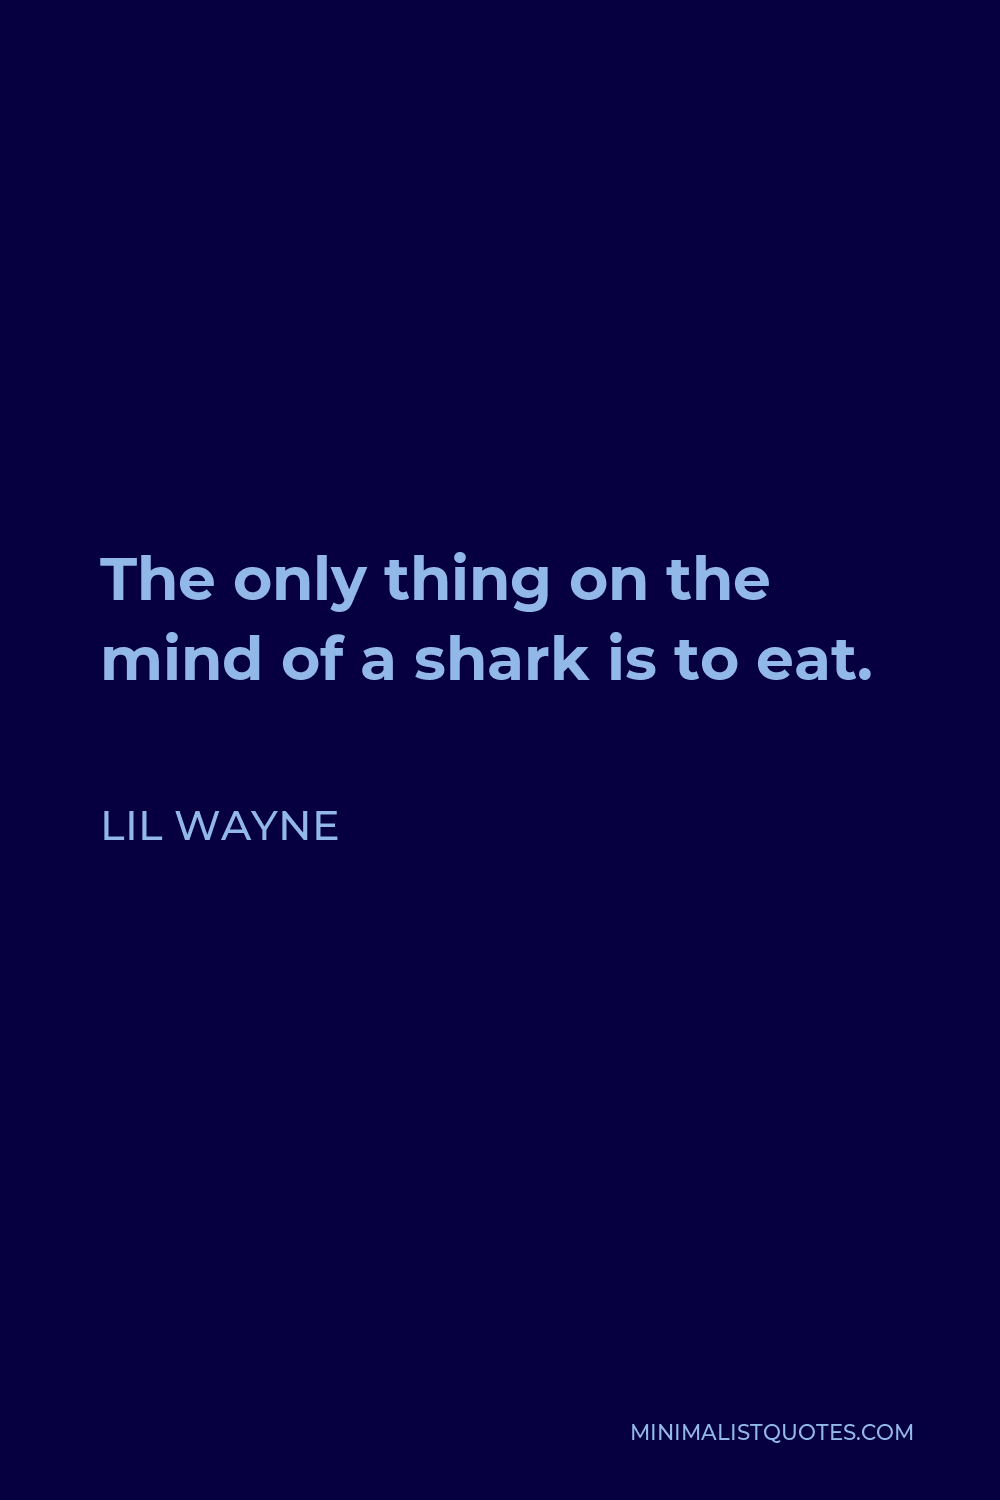 Lil Wayne Quote - The only thing on the mind of a shark is to eat.